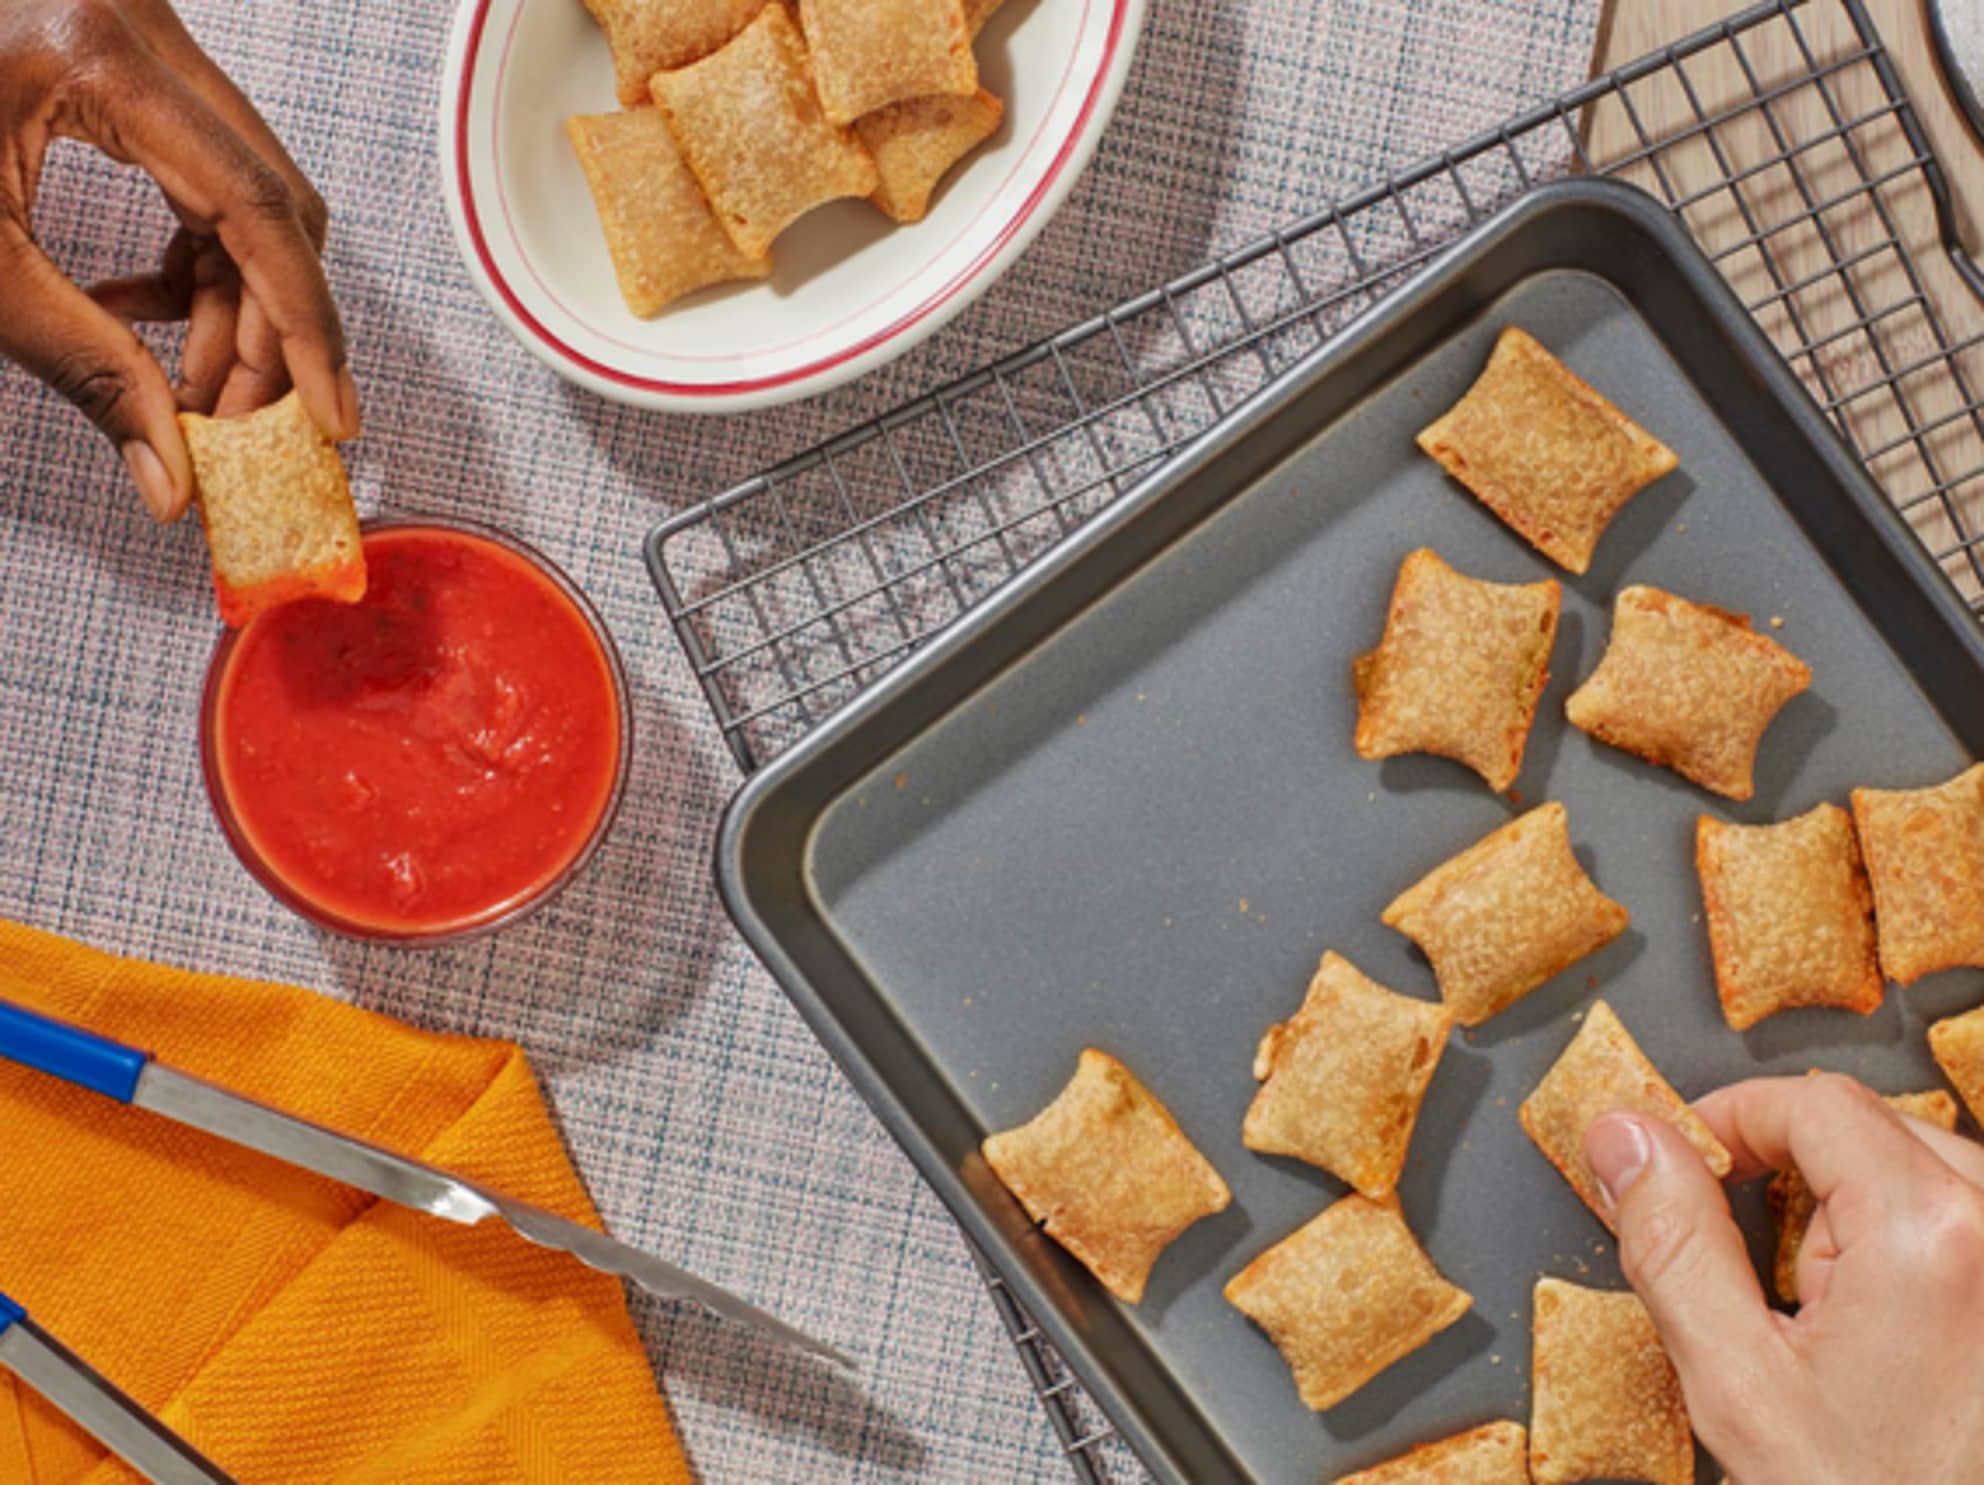 Totinos pizza rolls being taken off a baking sheet and dipped in marinara sauce